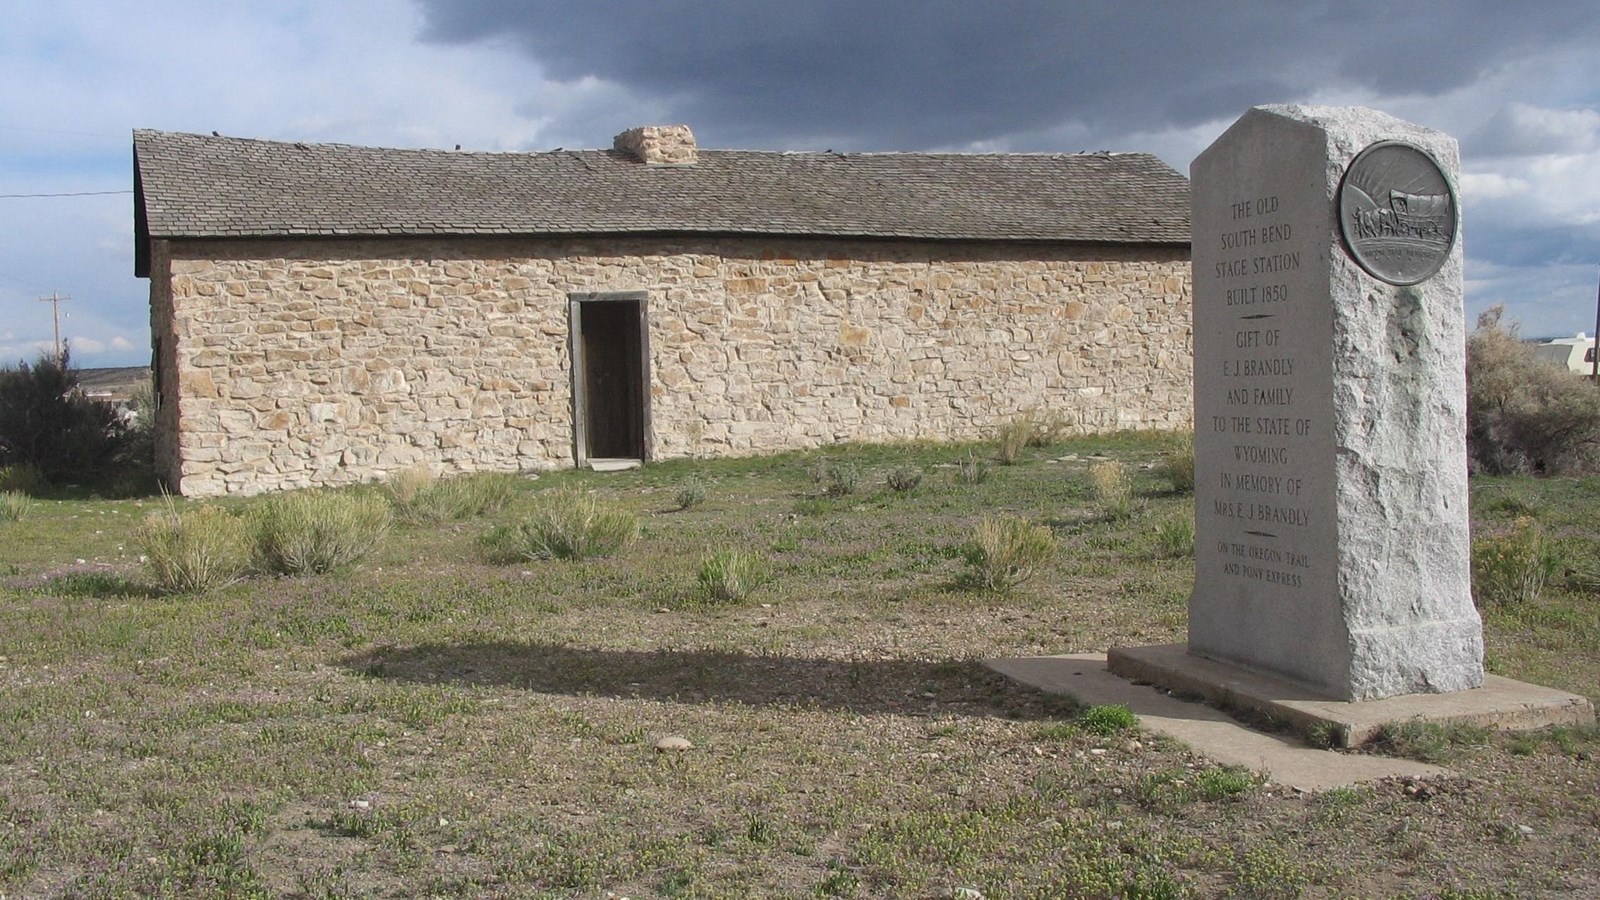 A stone monument stands next to a one story, stone building with a single door.